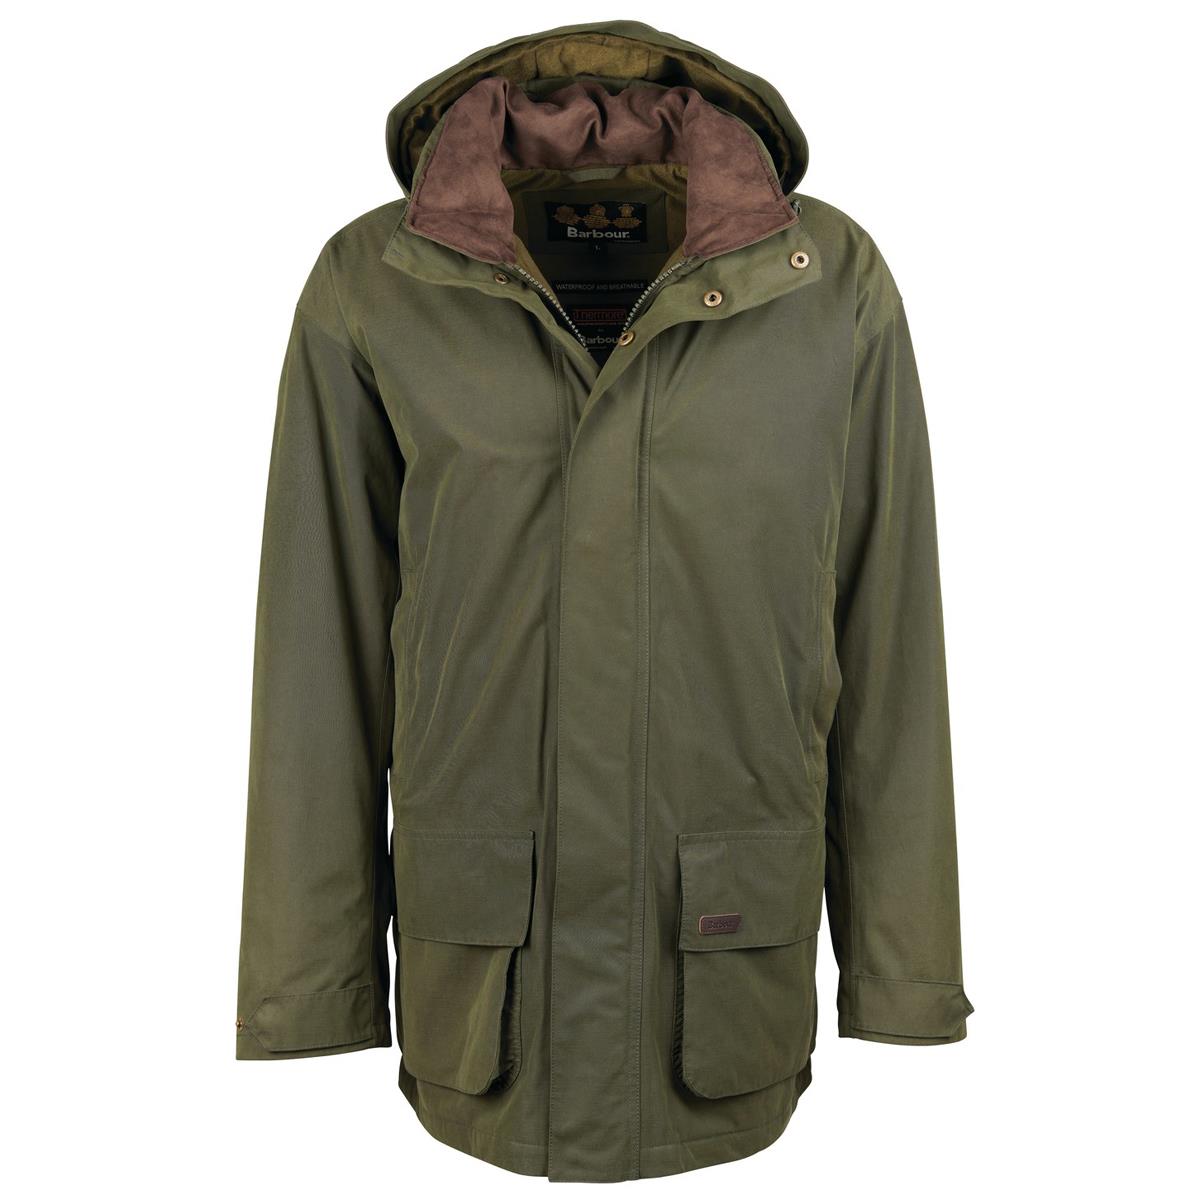 What makes the Barbour Mens Beaconsfield Jacket protective in wet weather?